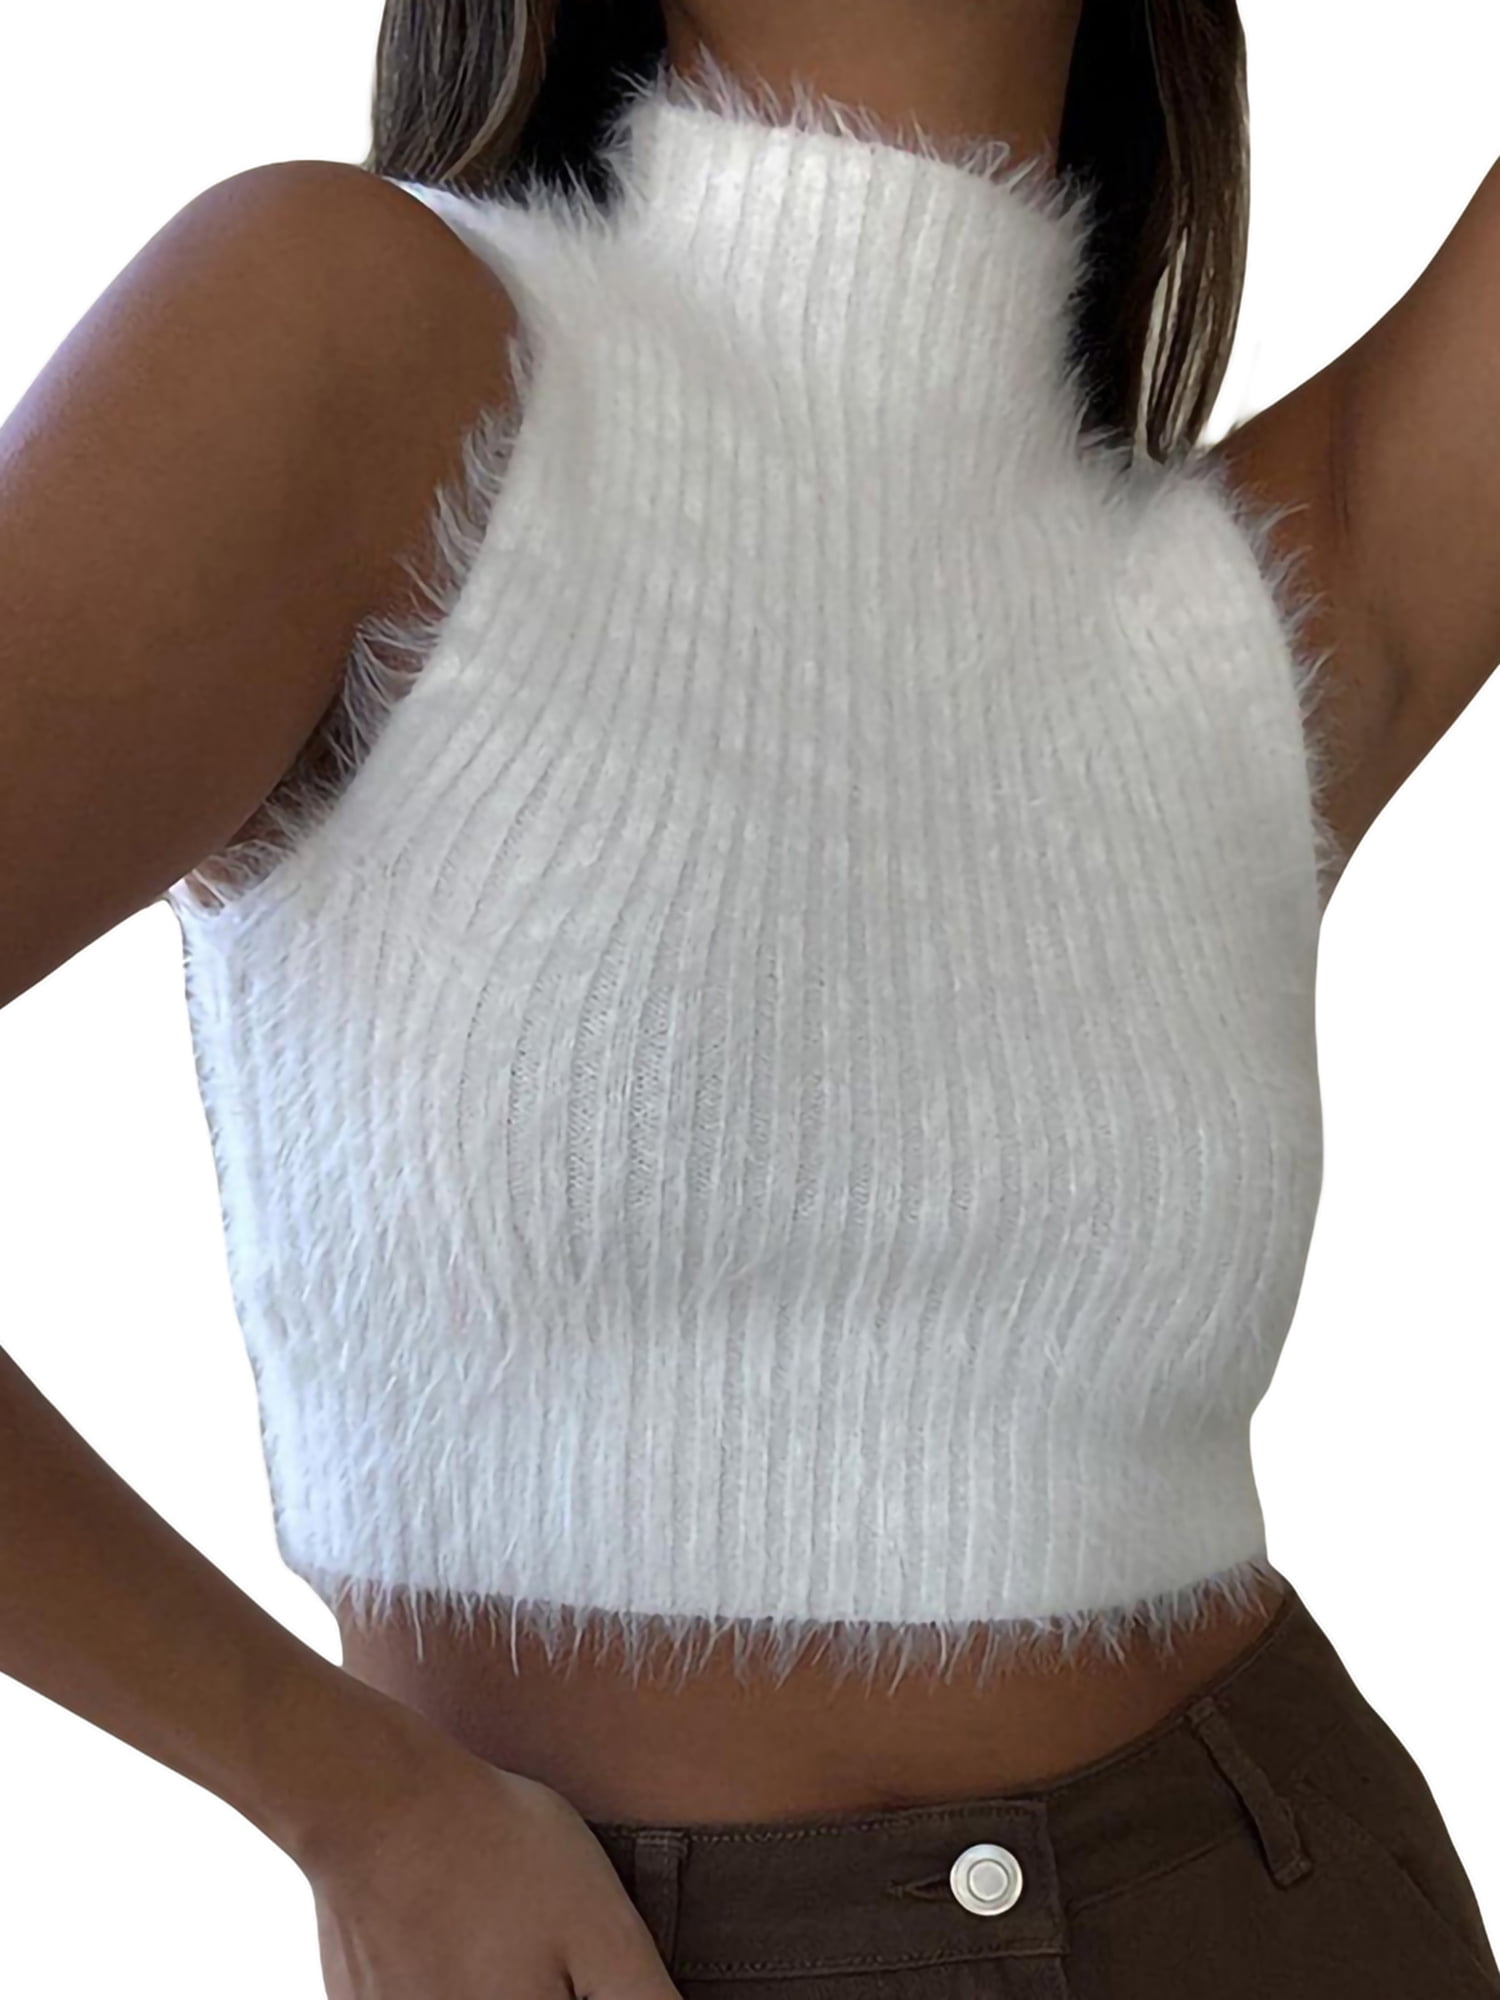 Women Turtleneck Sweater Vest Sleeveless Ribbed Knit Cropped Fuzzy Tank Top  Autumn High Neck Slim Fitted Vest - Walmart.com